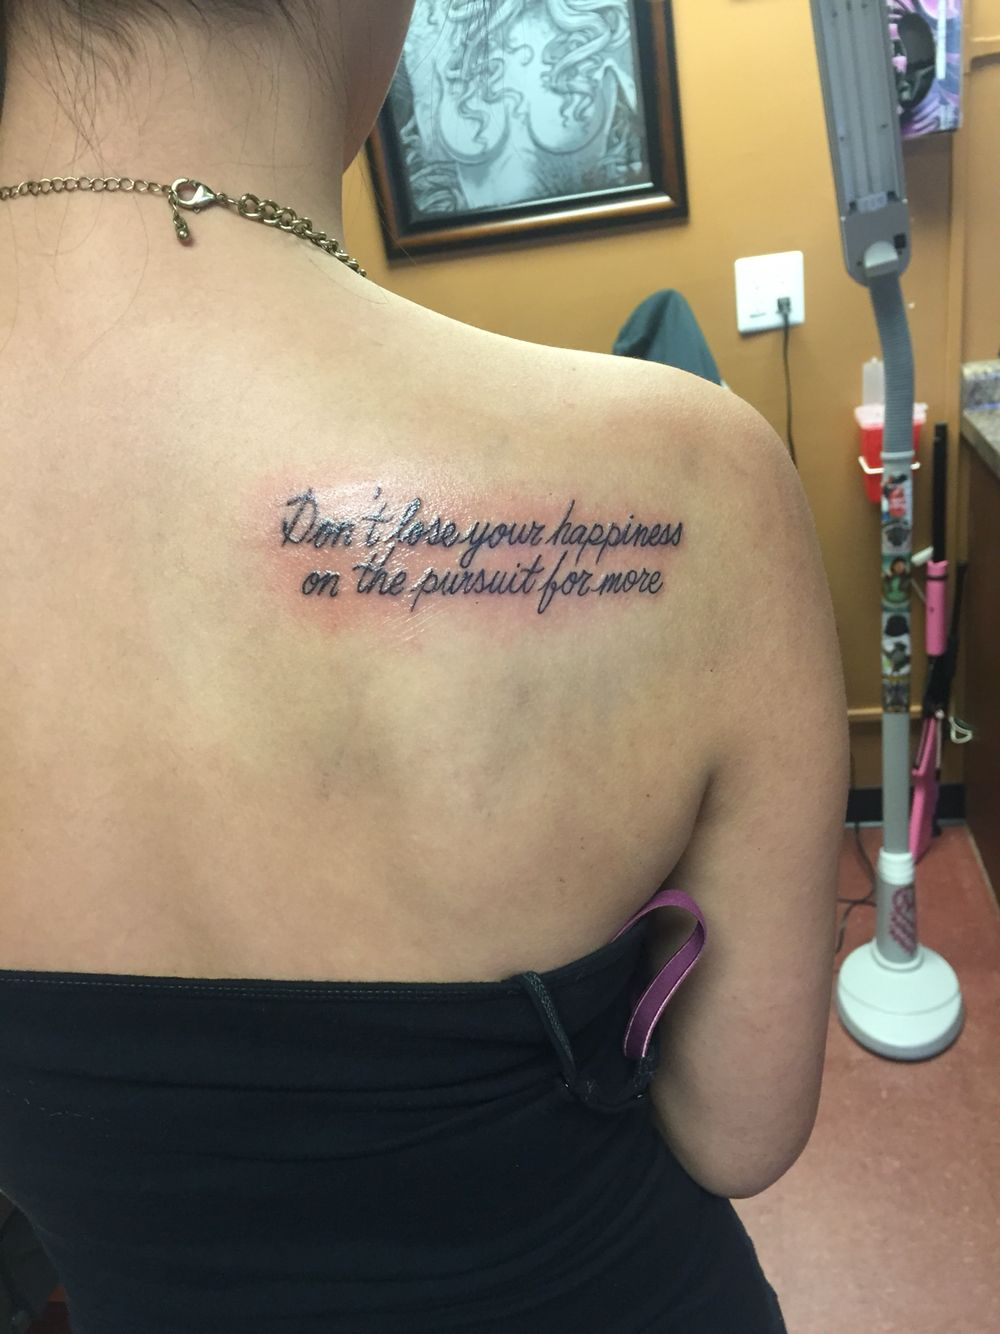 Shoulder Blade Tattoo Dont Lose Your Happiness On The Pursuit For inside measurements 1000 X 1334